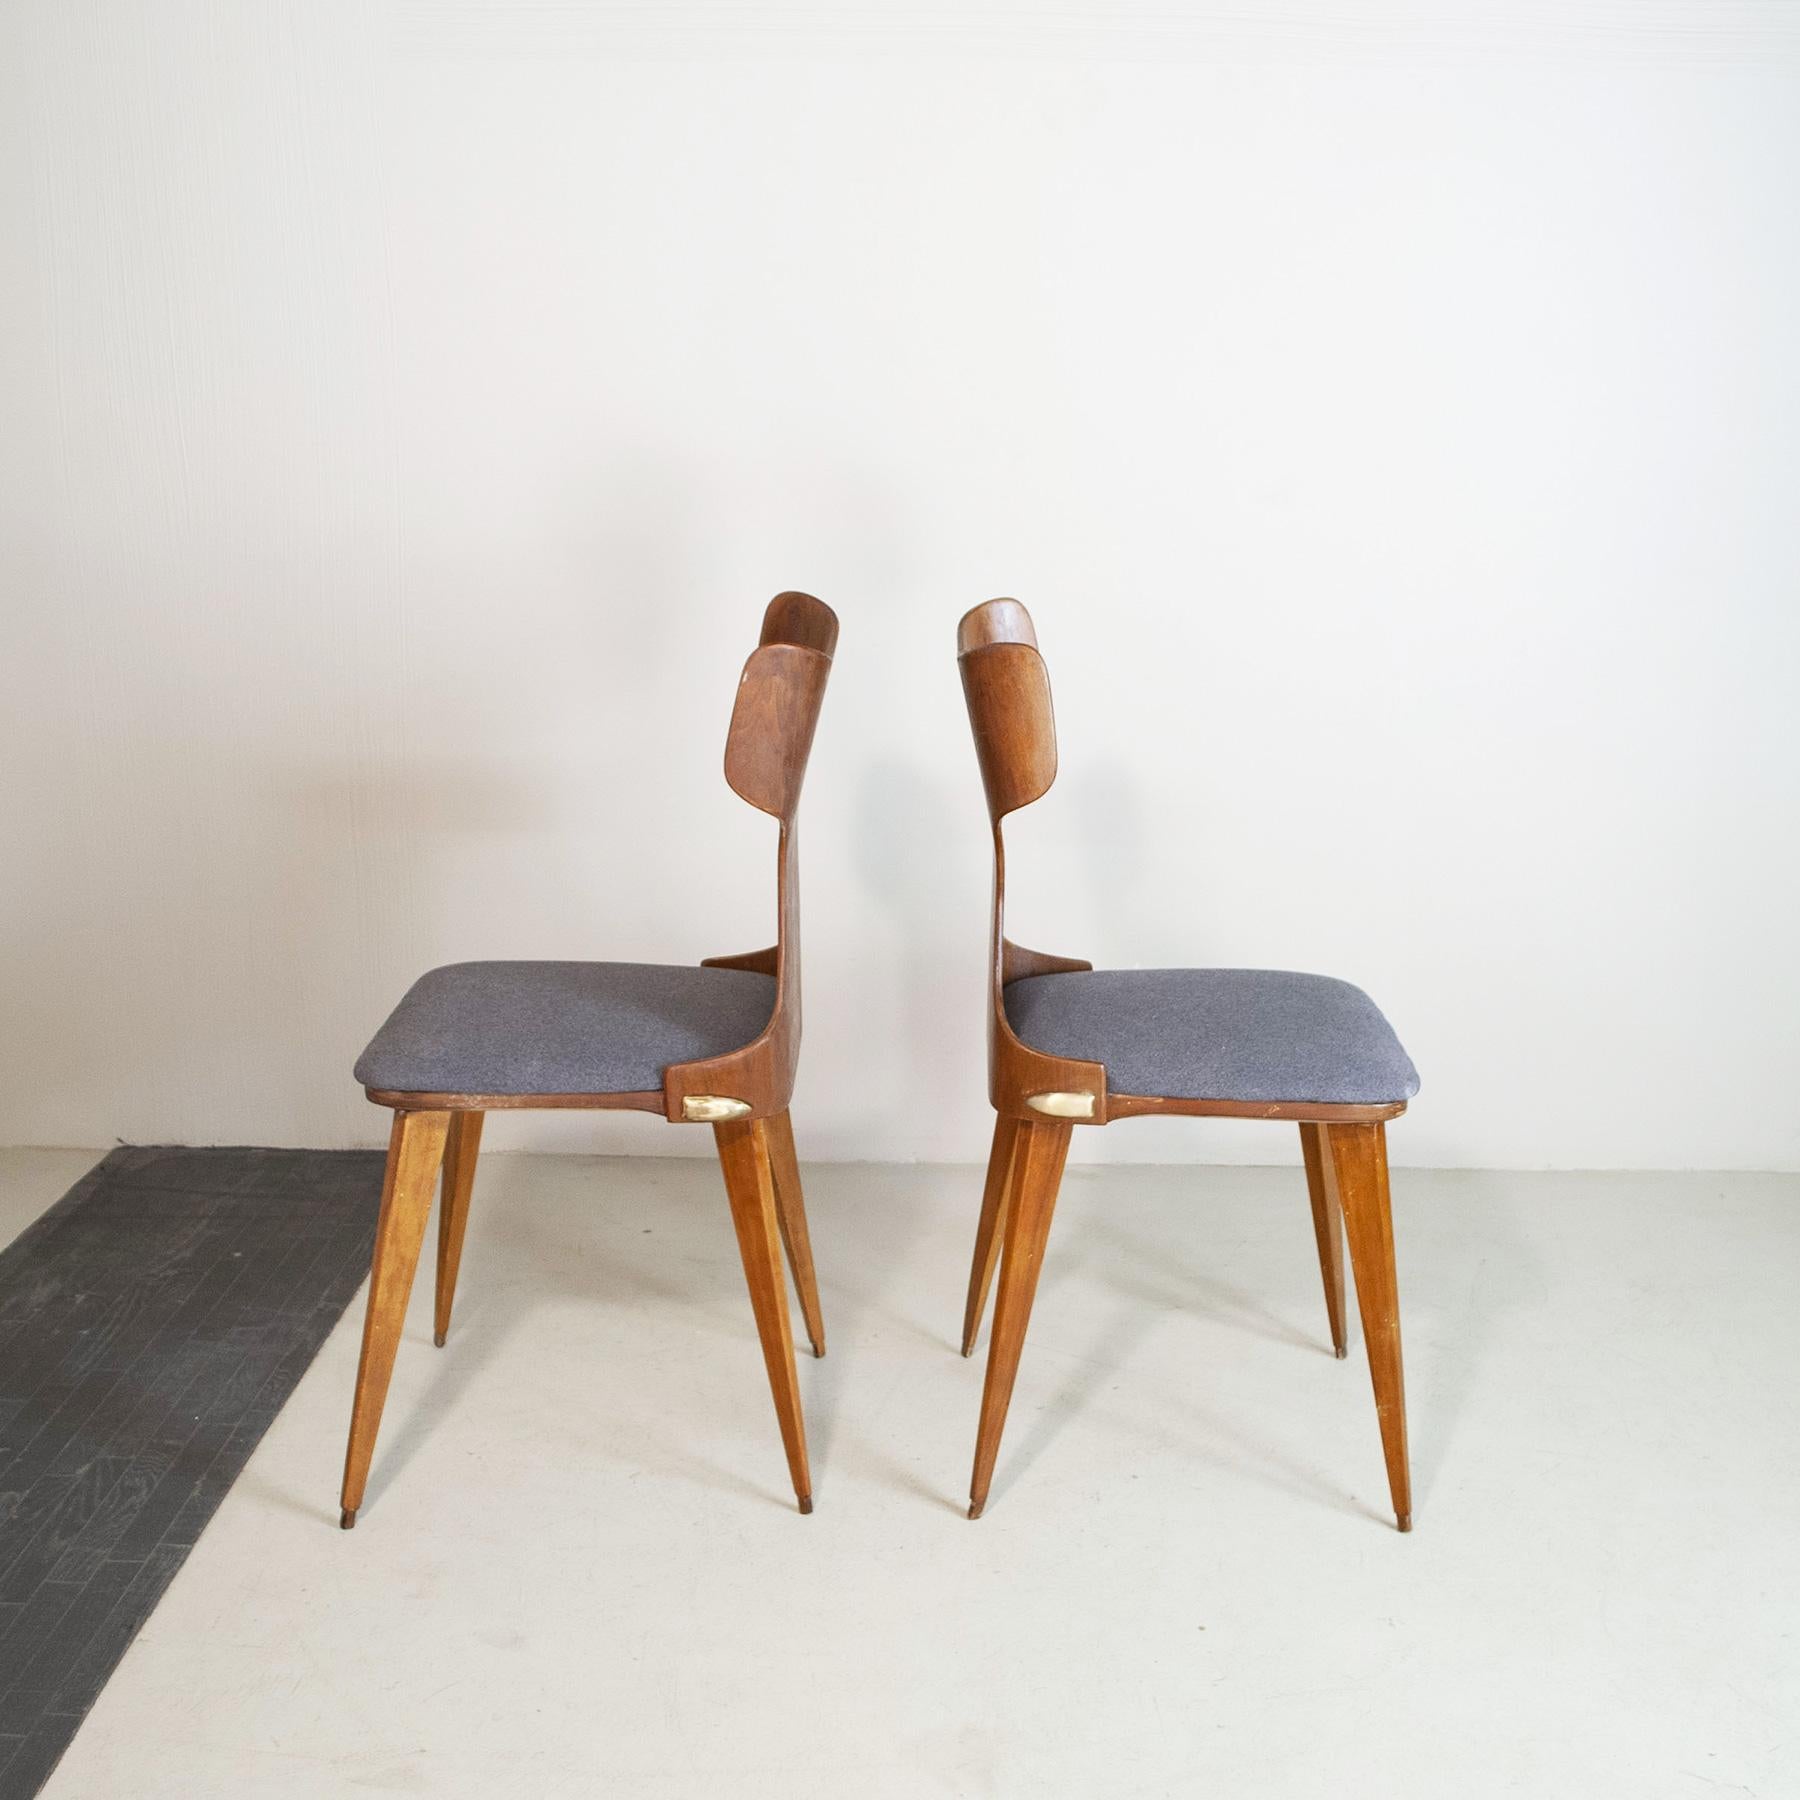 Carlo Ratti Italian Midcentury Chairs Form the Fifties In Good Condition For Sale In bari, IT